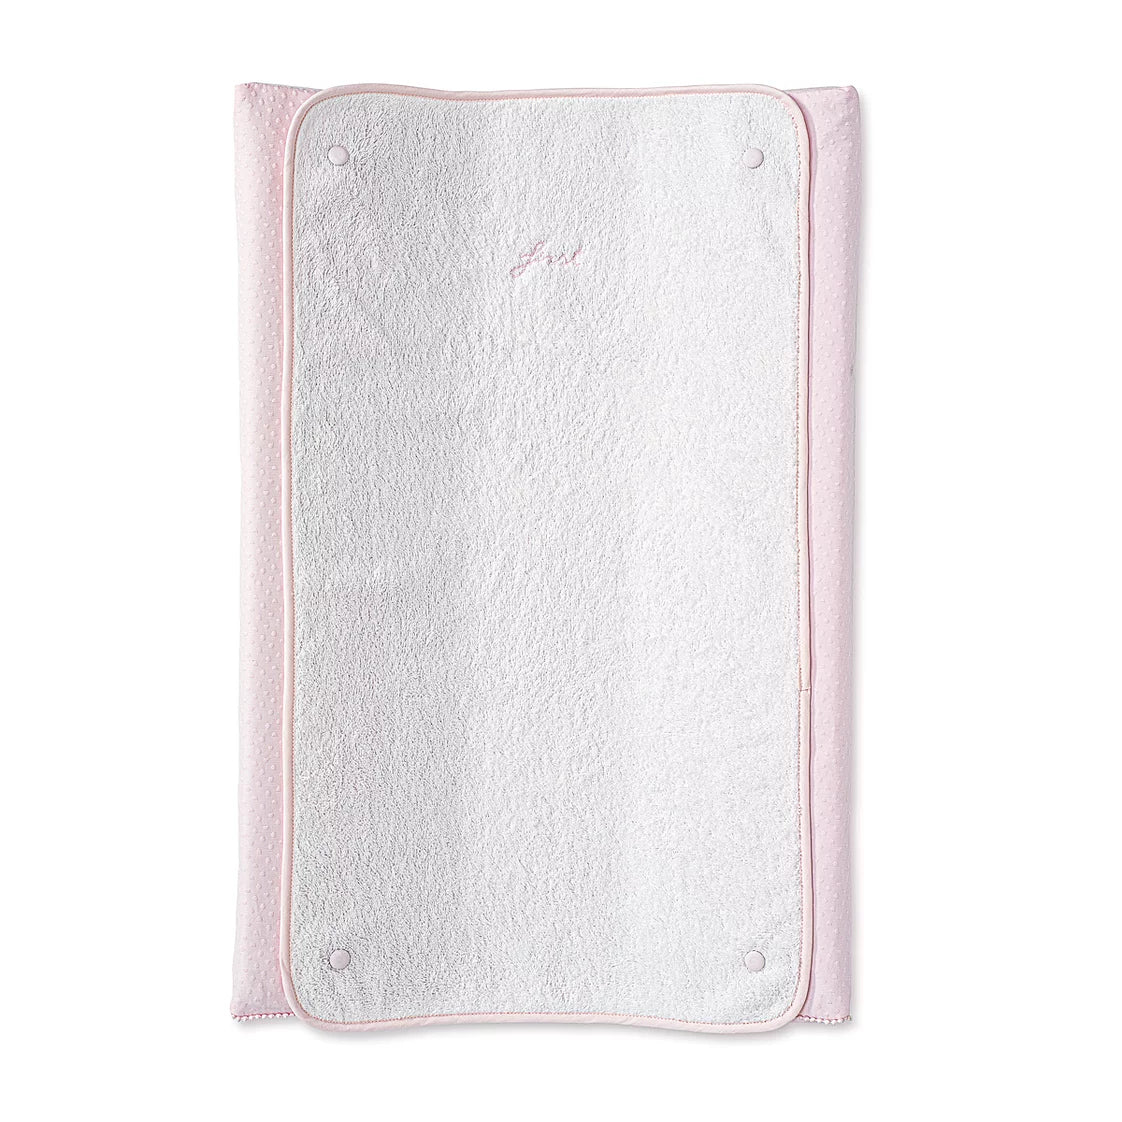 First New Pretty Pink Changing Pad Cover & Towel